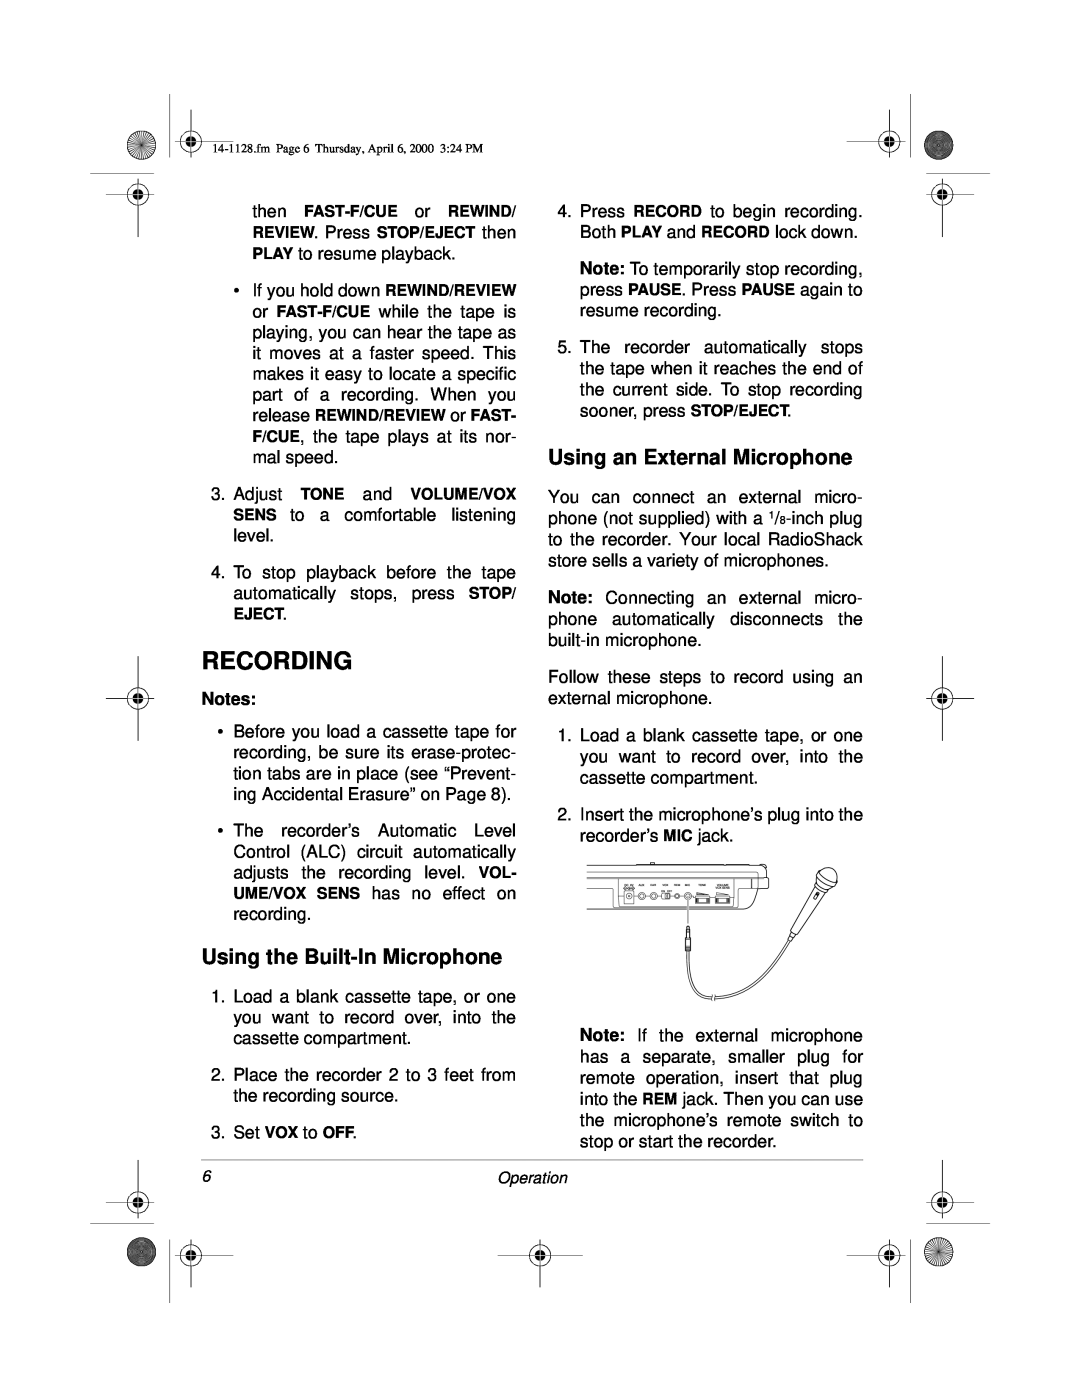 Radio Shack Portable Cassette Recorder owner manual Recording, Using an External Microphone, Using the Built-InMicrophone 